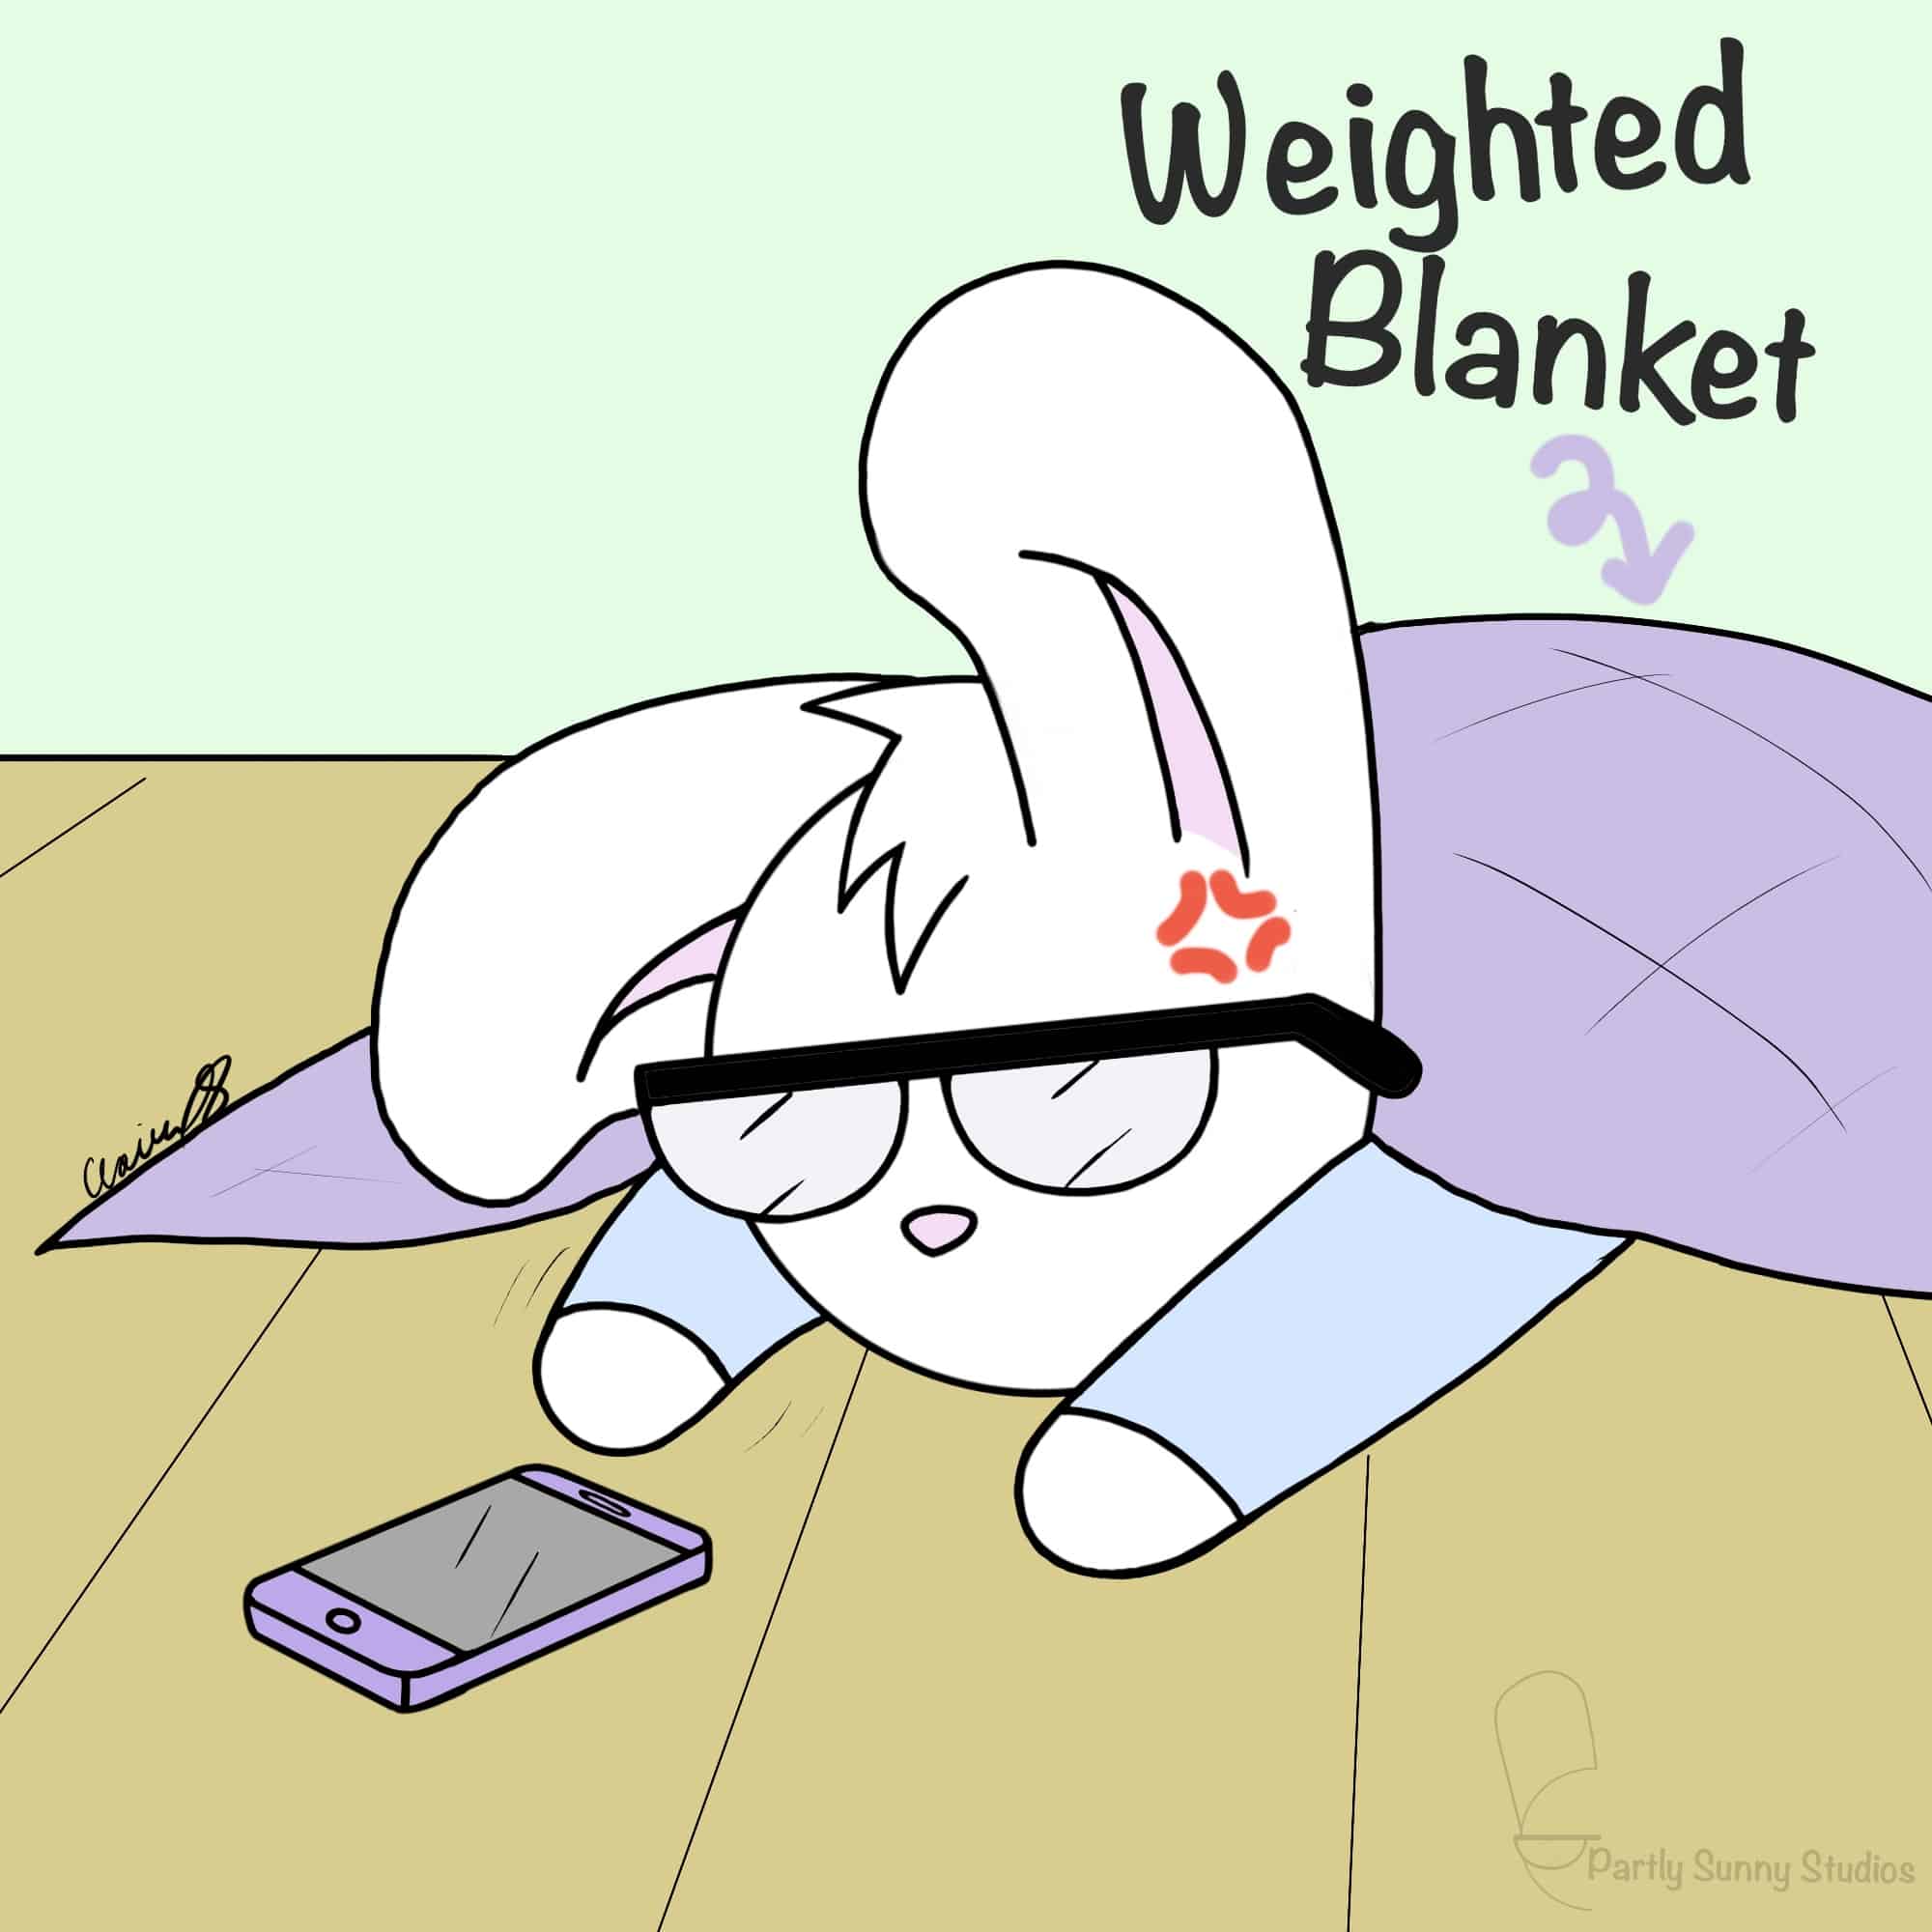 Weighted Blanket - Partly Sunny Studios